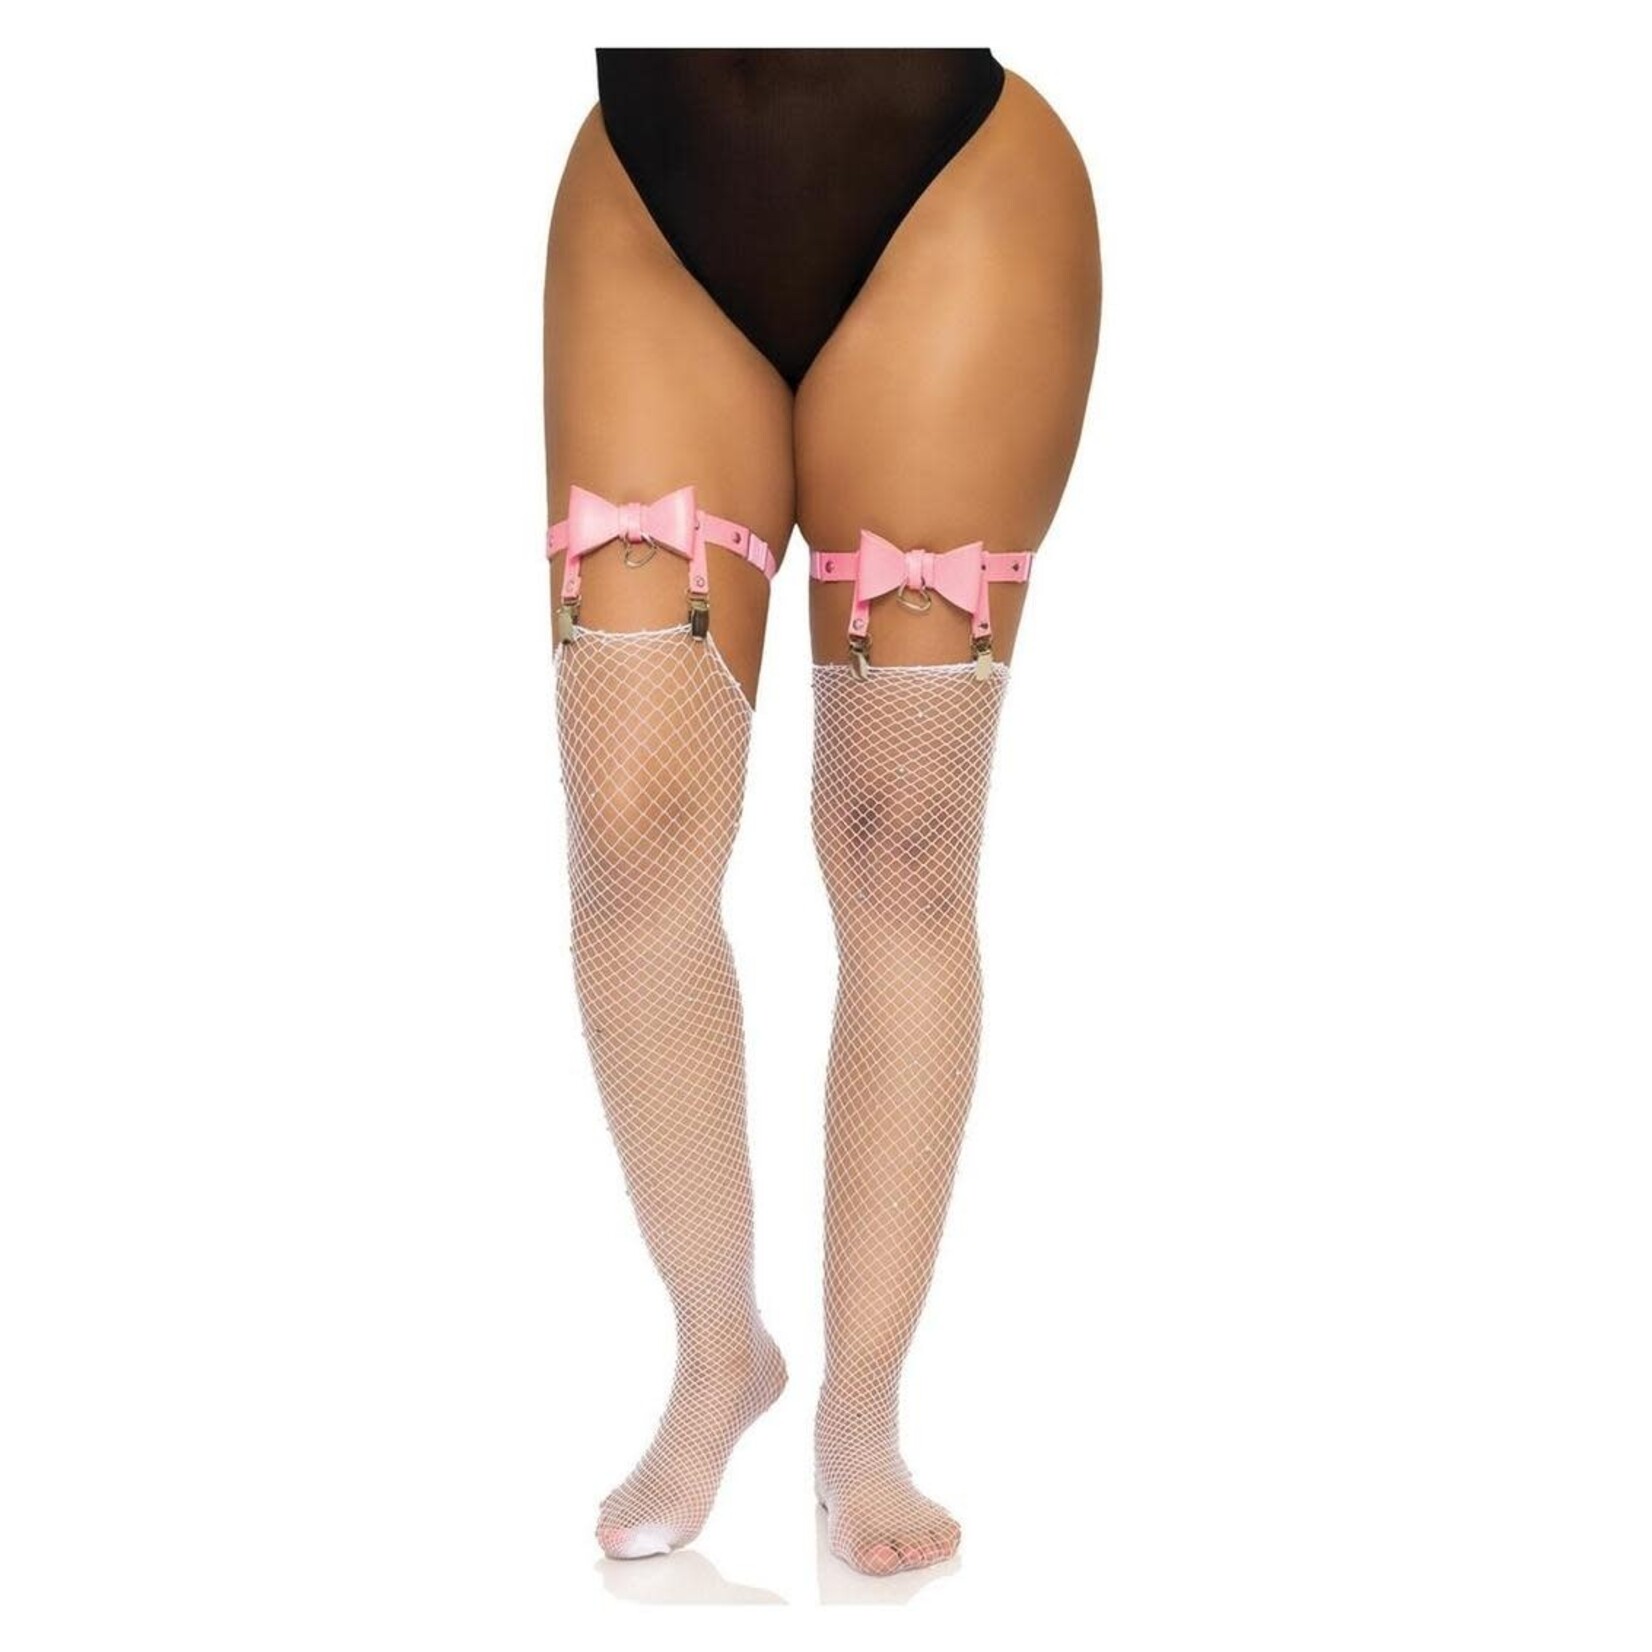 Vegan Leather Thigh High Bow Garter with Adjustable Straps and Heart Ring Accent - O/S - Pink